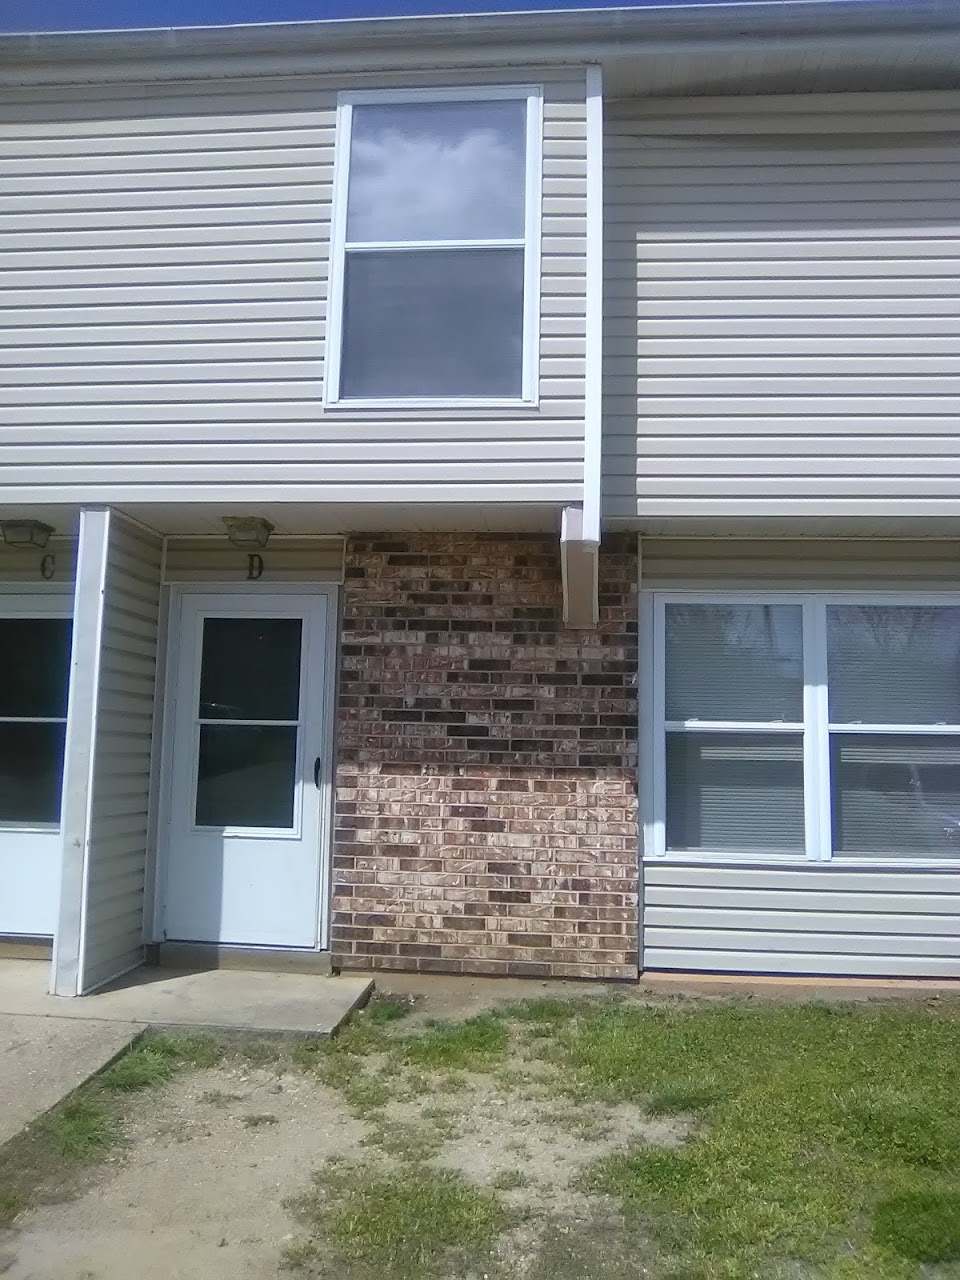 Photo of MONROE ESTATES. Affordable housing located at 411 KNIGHT ST LEBANON, MO 65536